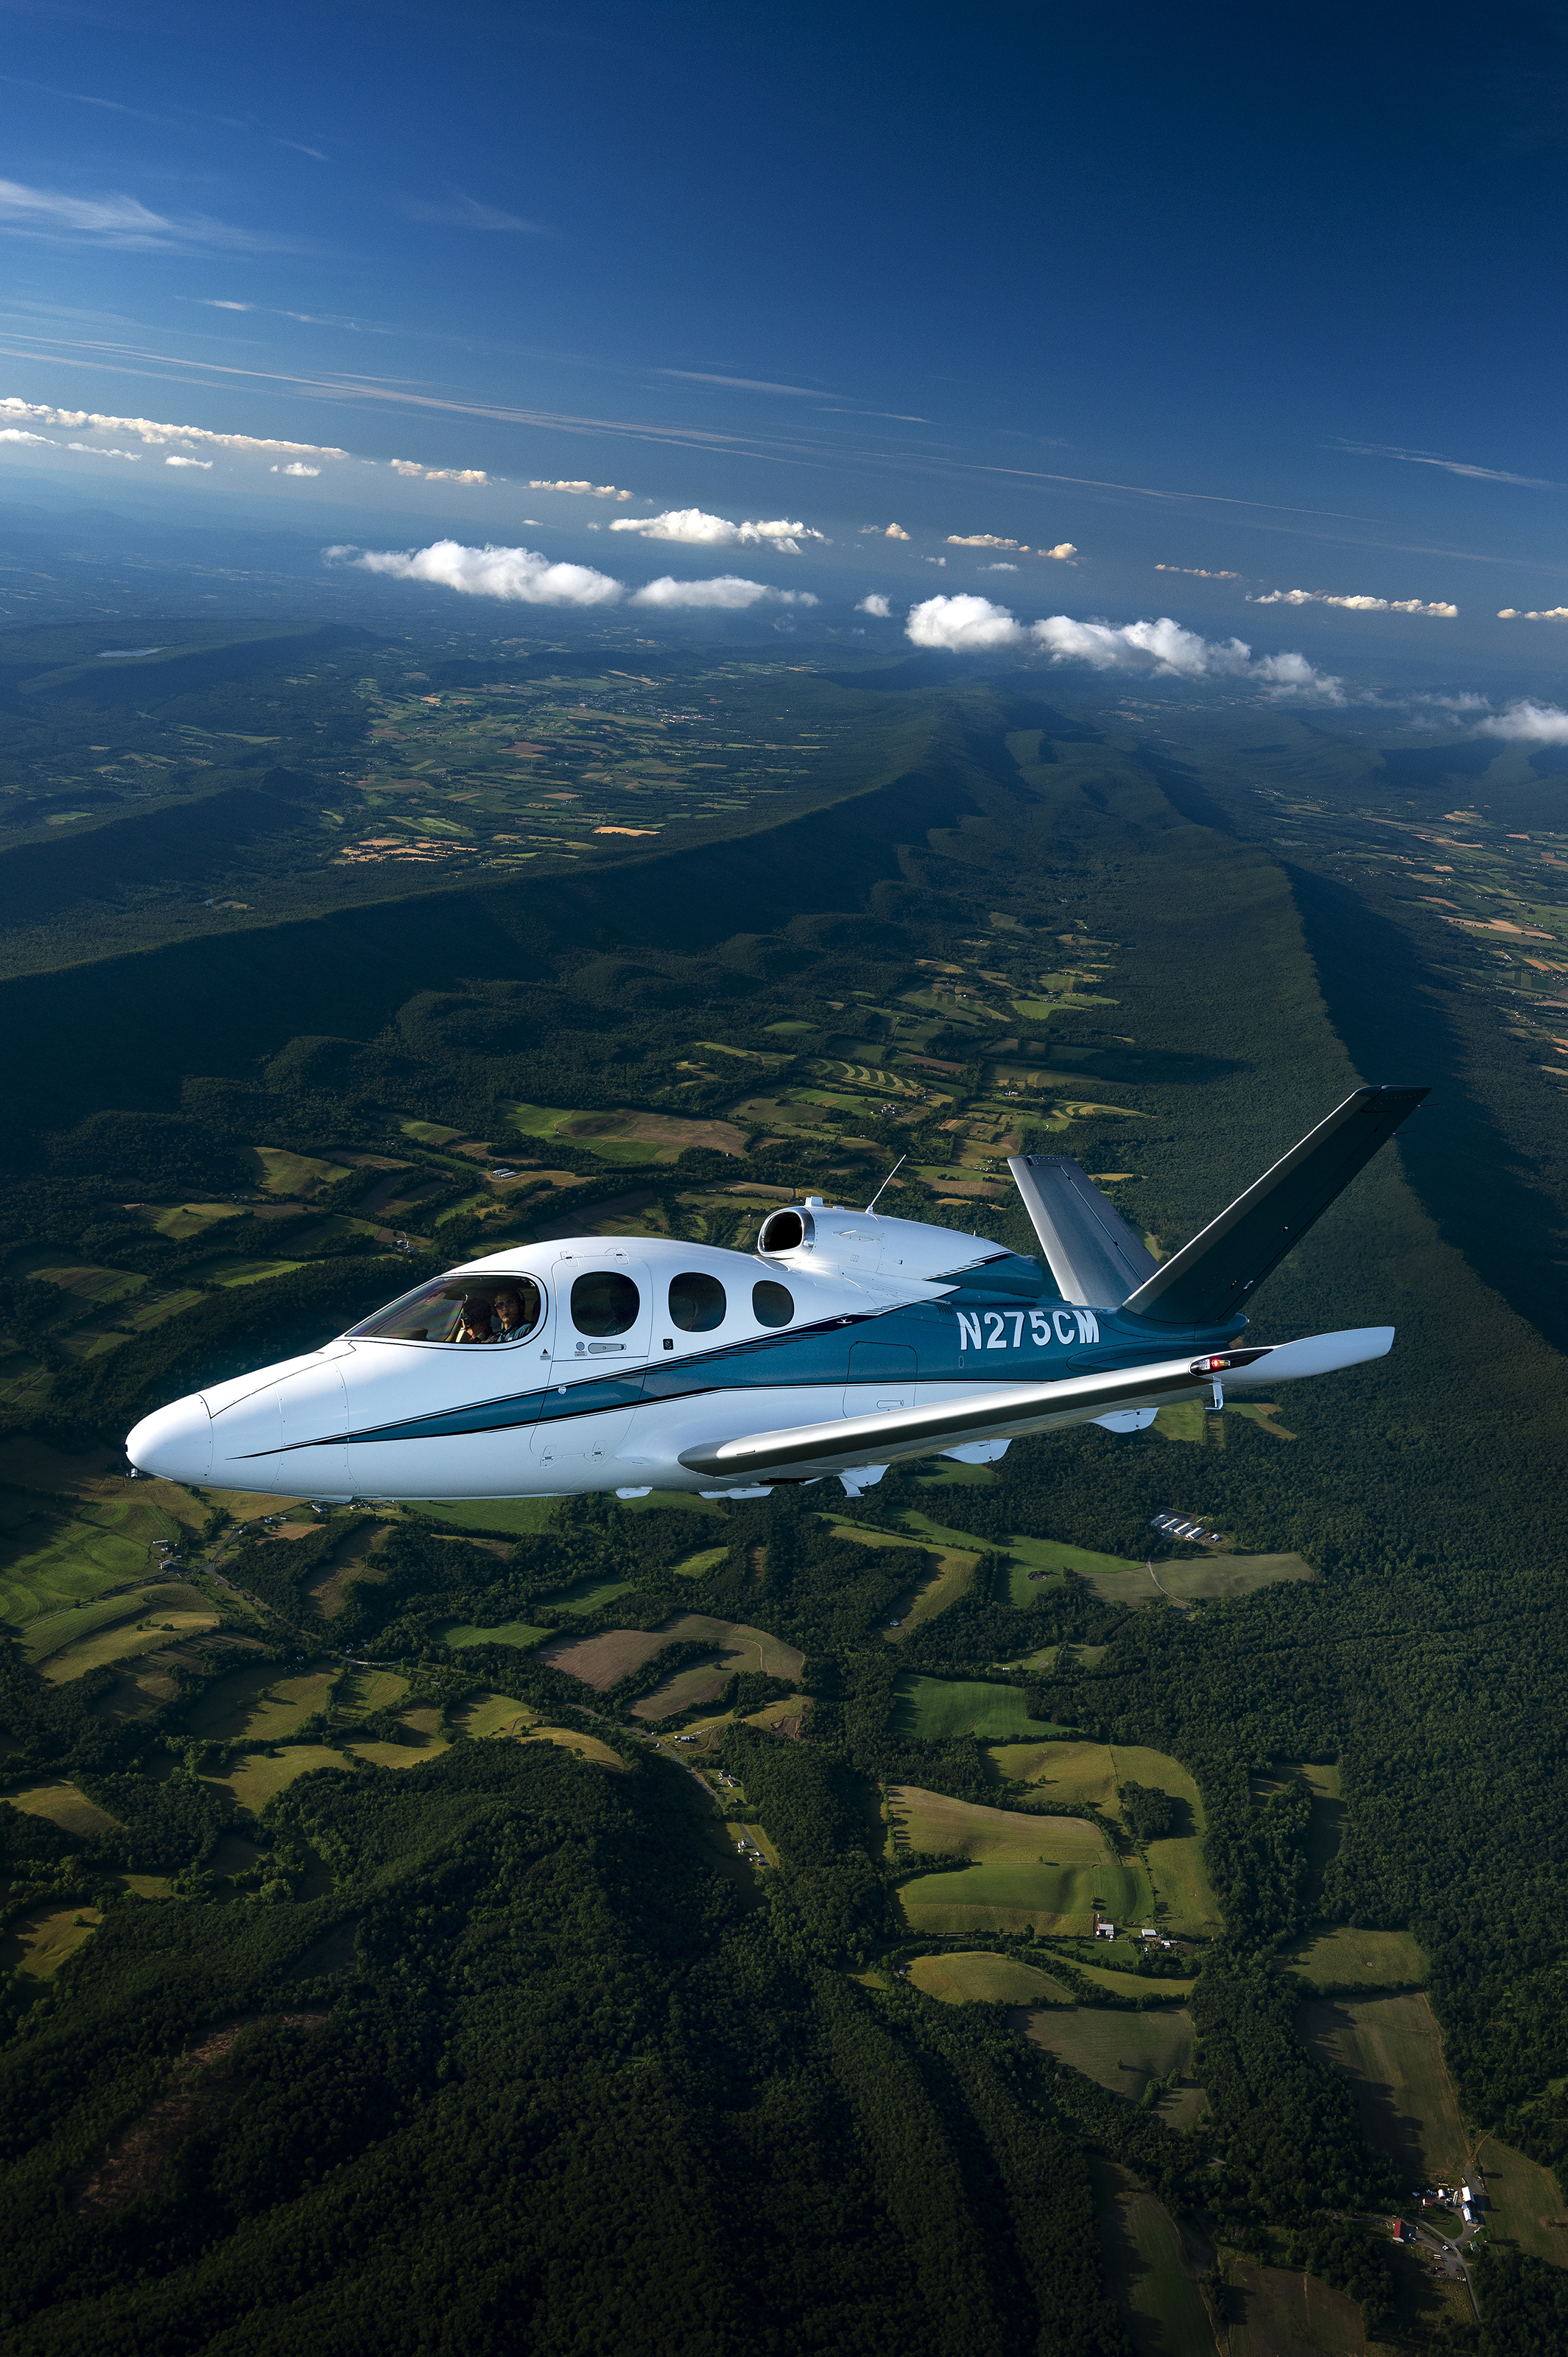 The Appalachian Mountains of West Virginia frame a Cirrus Vision Jet G2+ that is capable of cruising at 305 knots true airspeed. Photo by David Tulis.